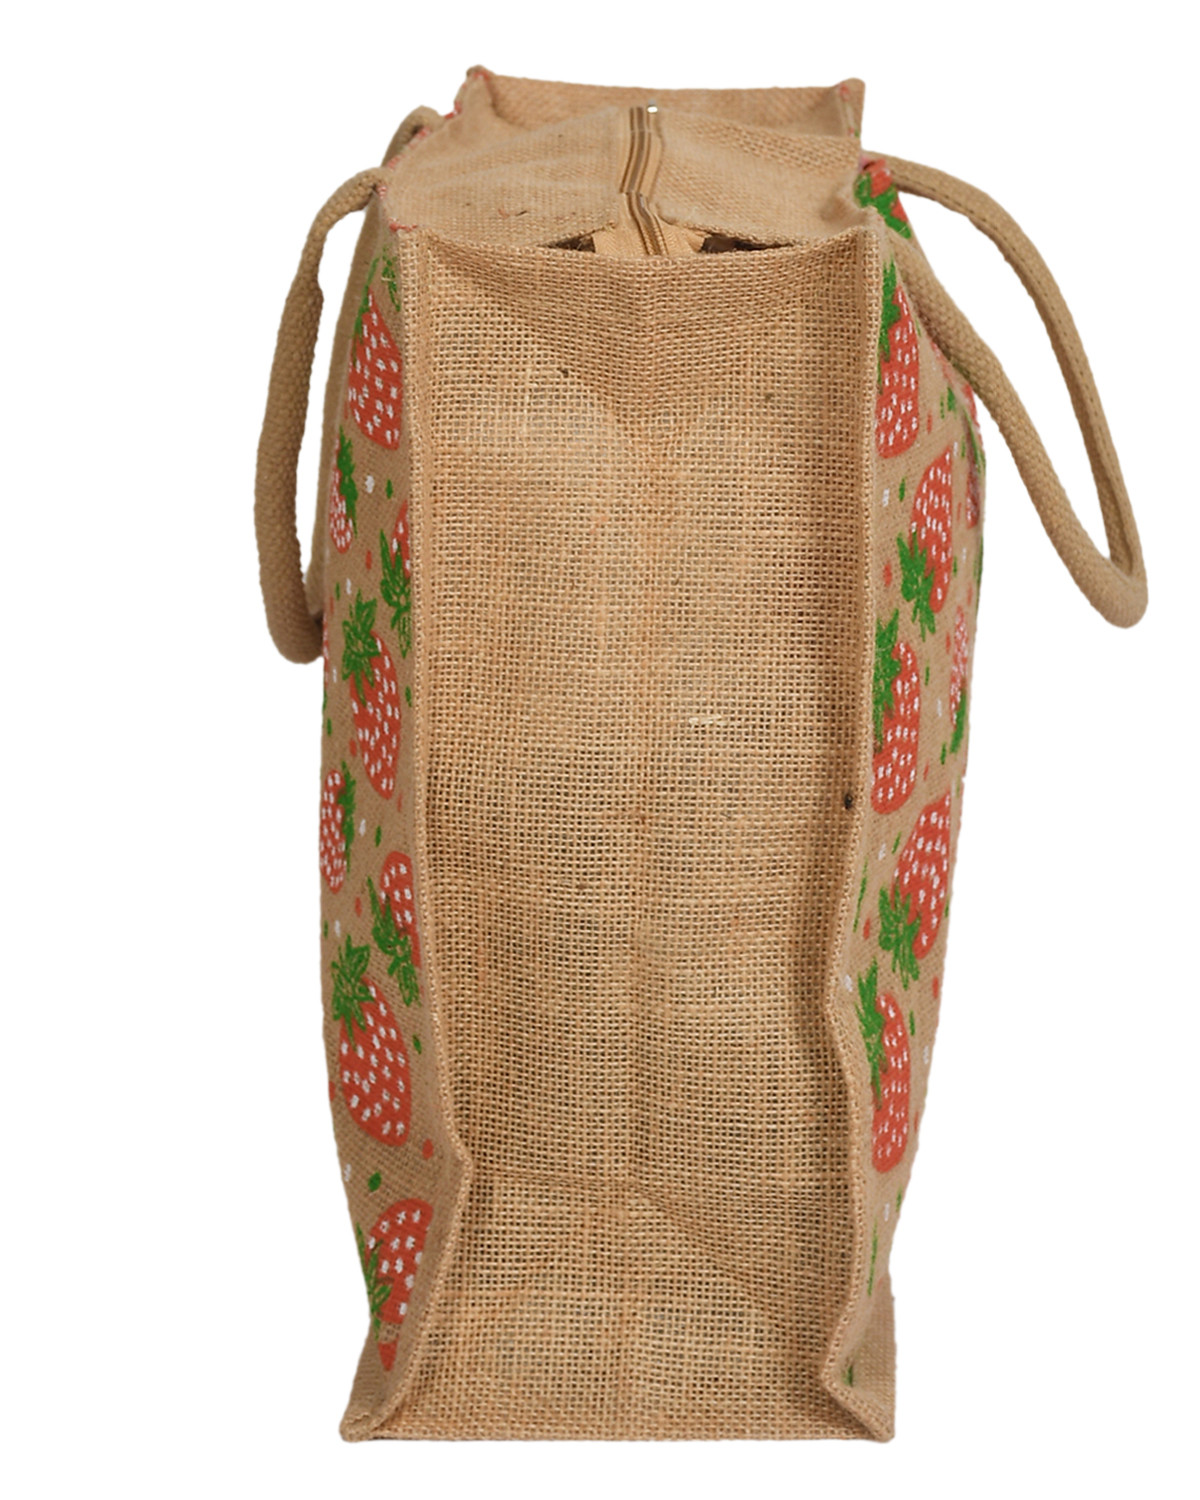 Kuber Industries Strawberry Print Jute Reusable Eco-Friendly Hand Bag/Grocery Bag For Man, Woman With Handle (Brown and Red) 54KM4369